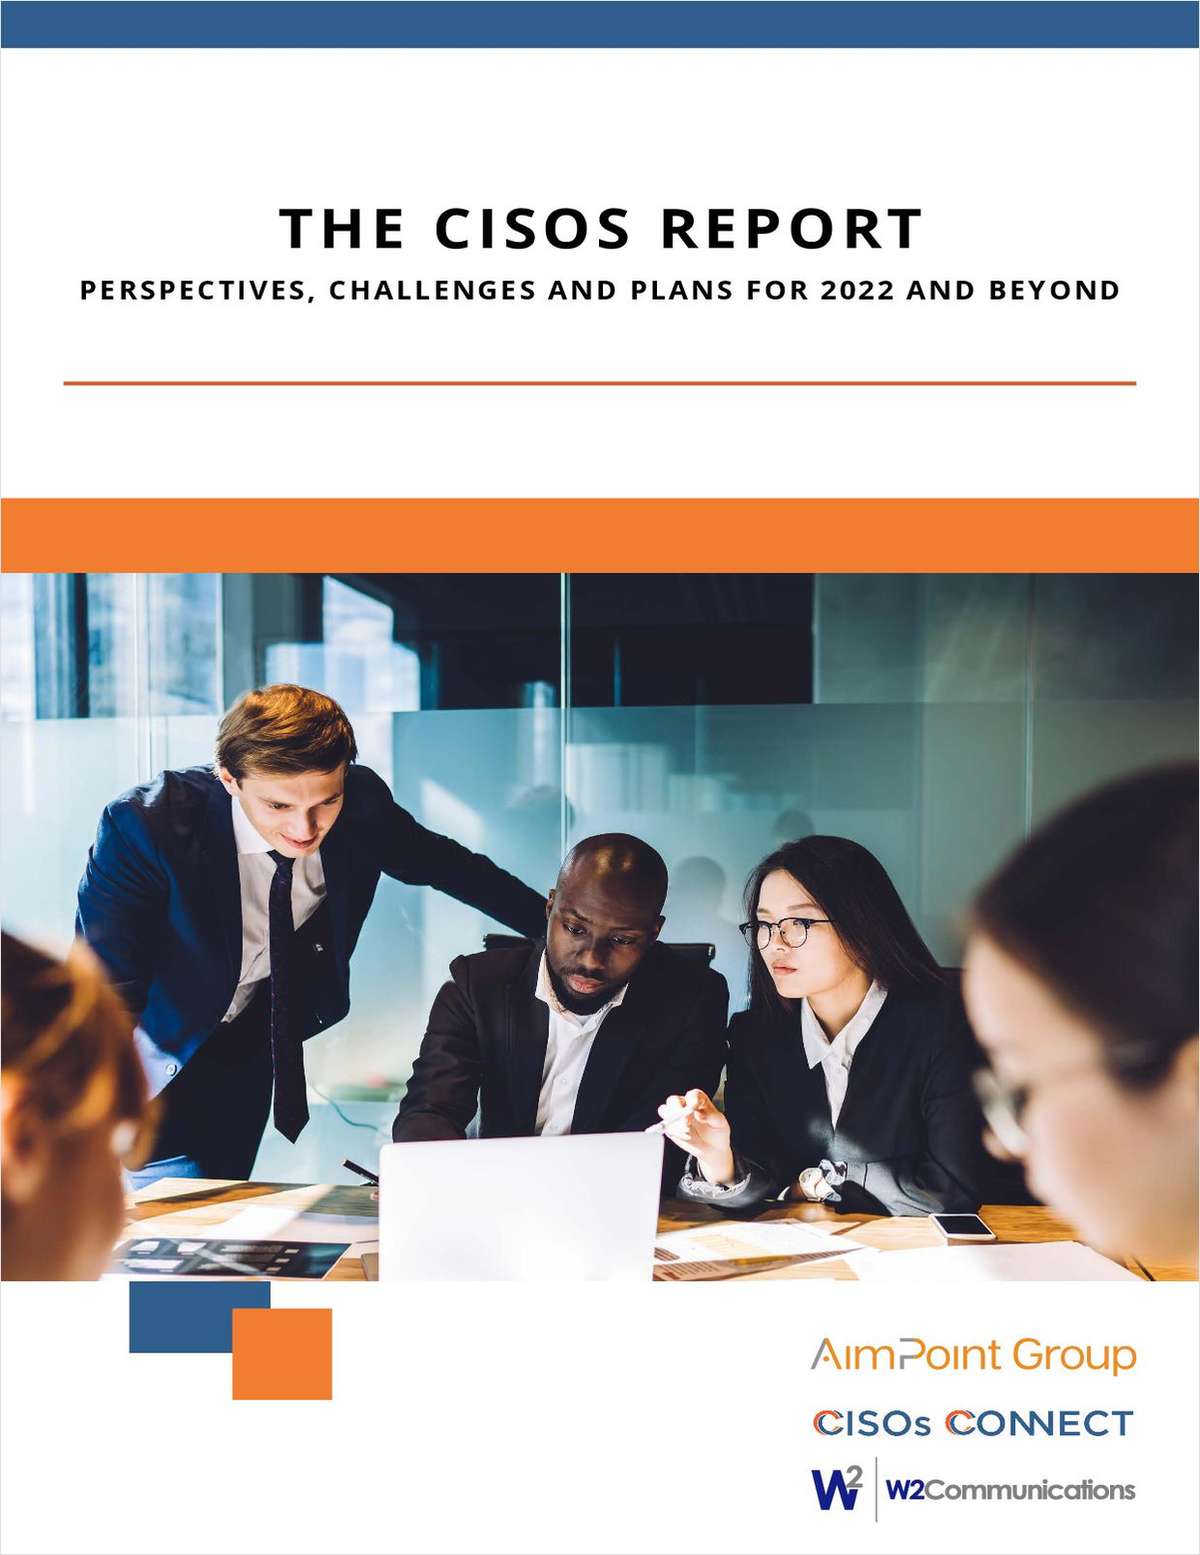 The CISOs Report: Perspectives, Challenges, and Plans for 2022 and Beyond